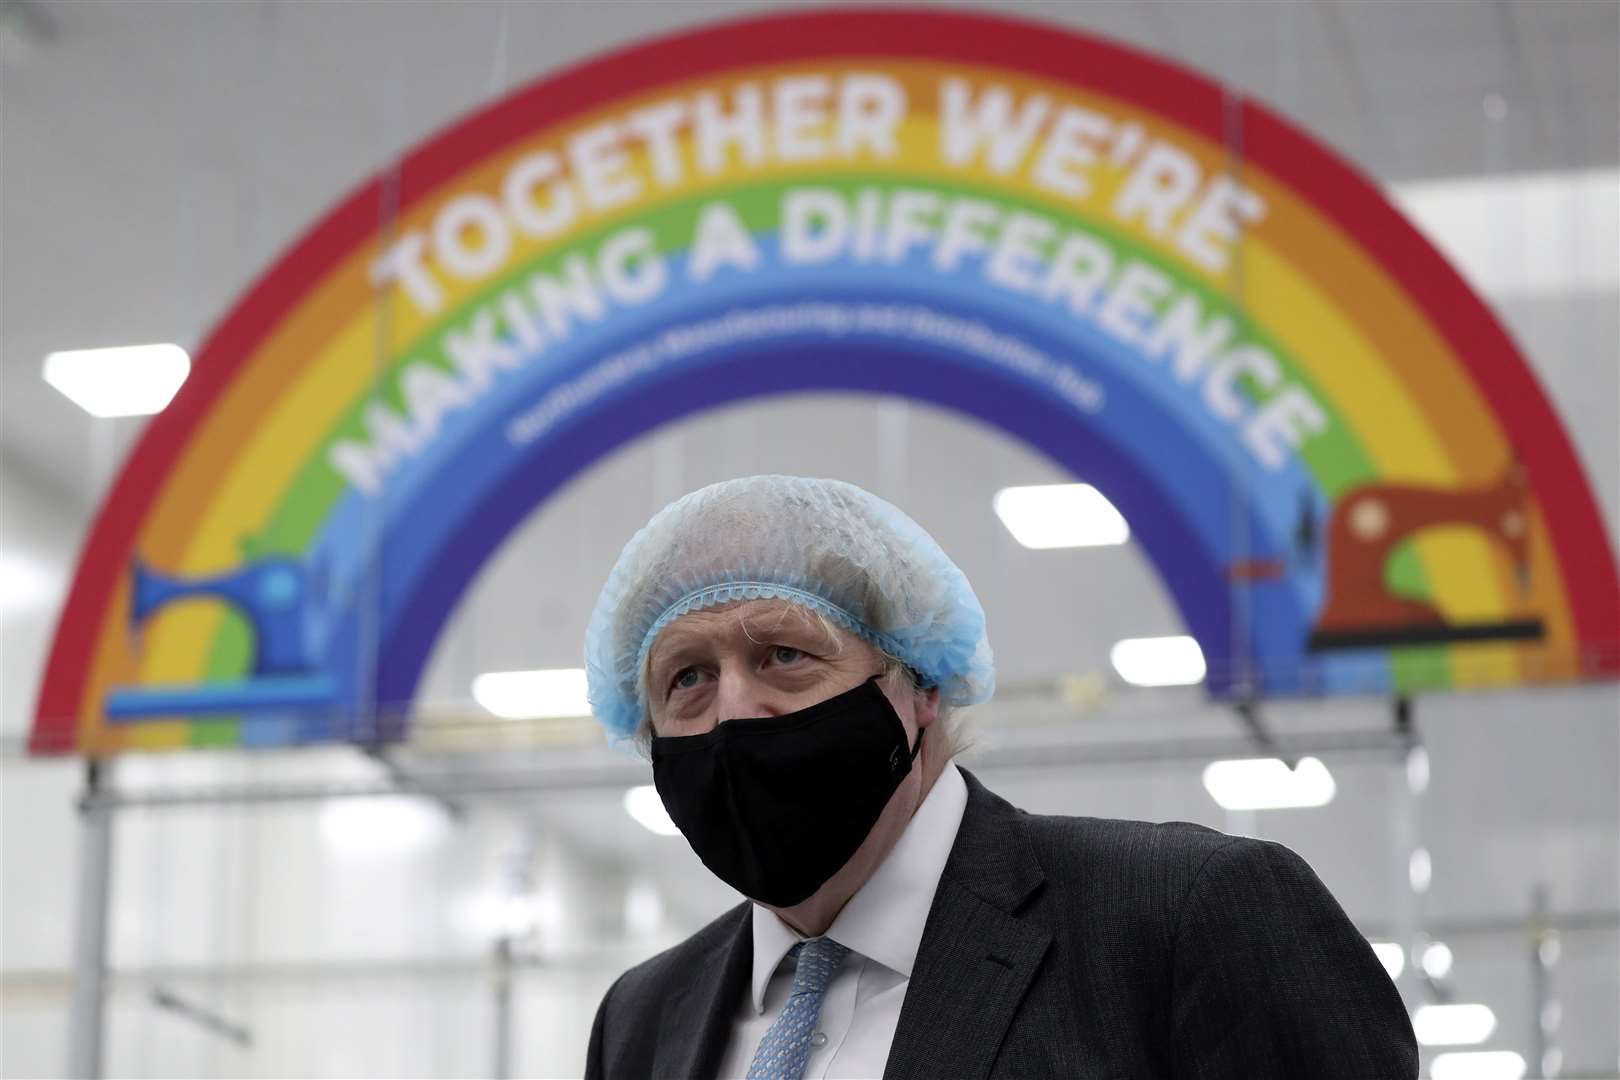 The Prime Minister during a visit to a PPE manufacturing facility in Seaton Delaval (Scott Heppell/PA)